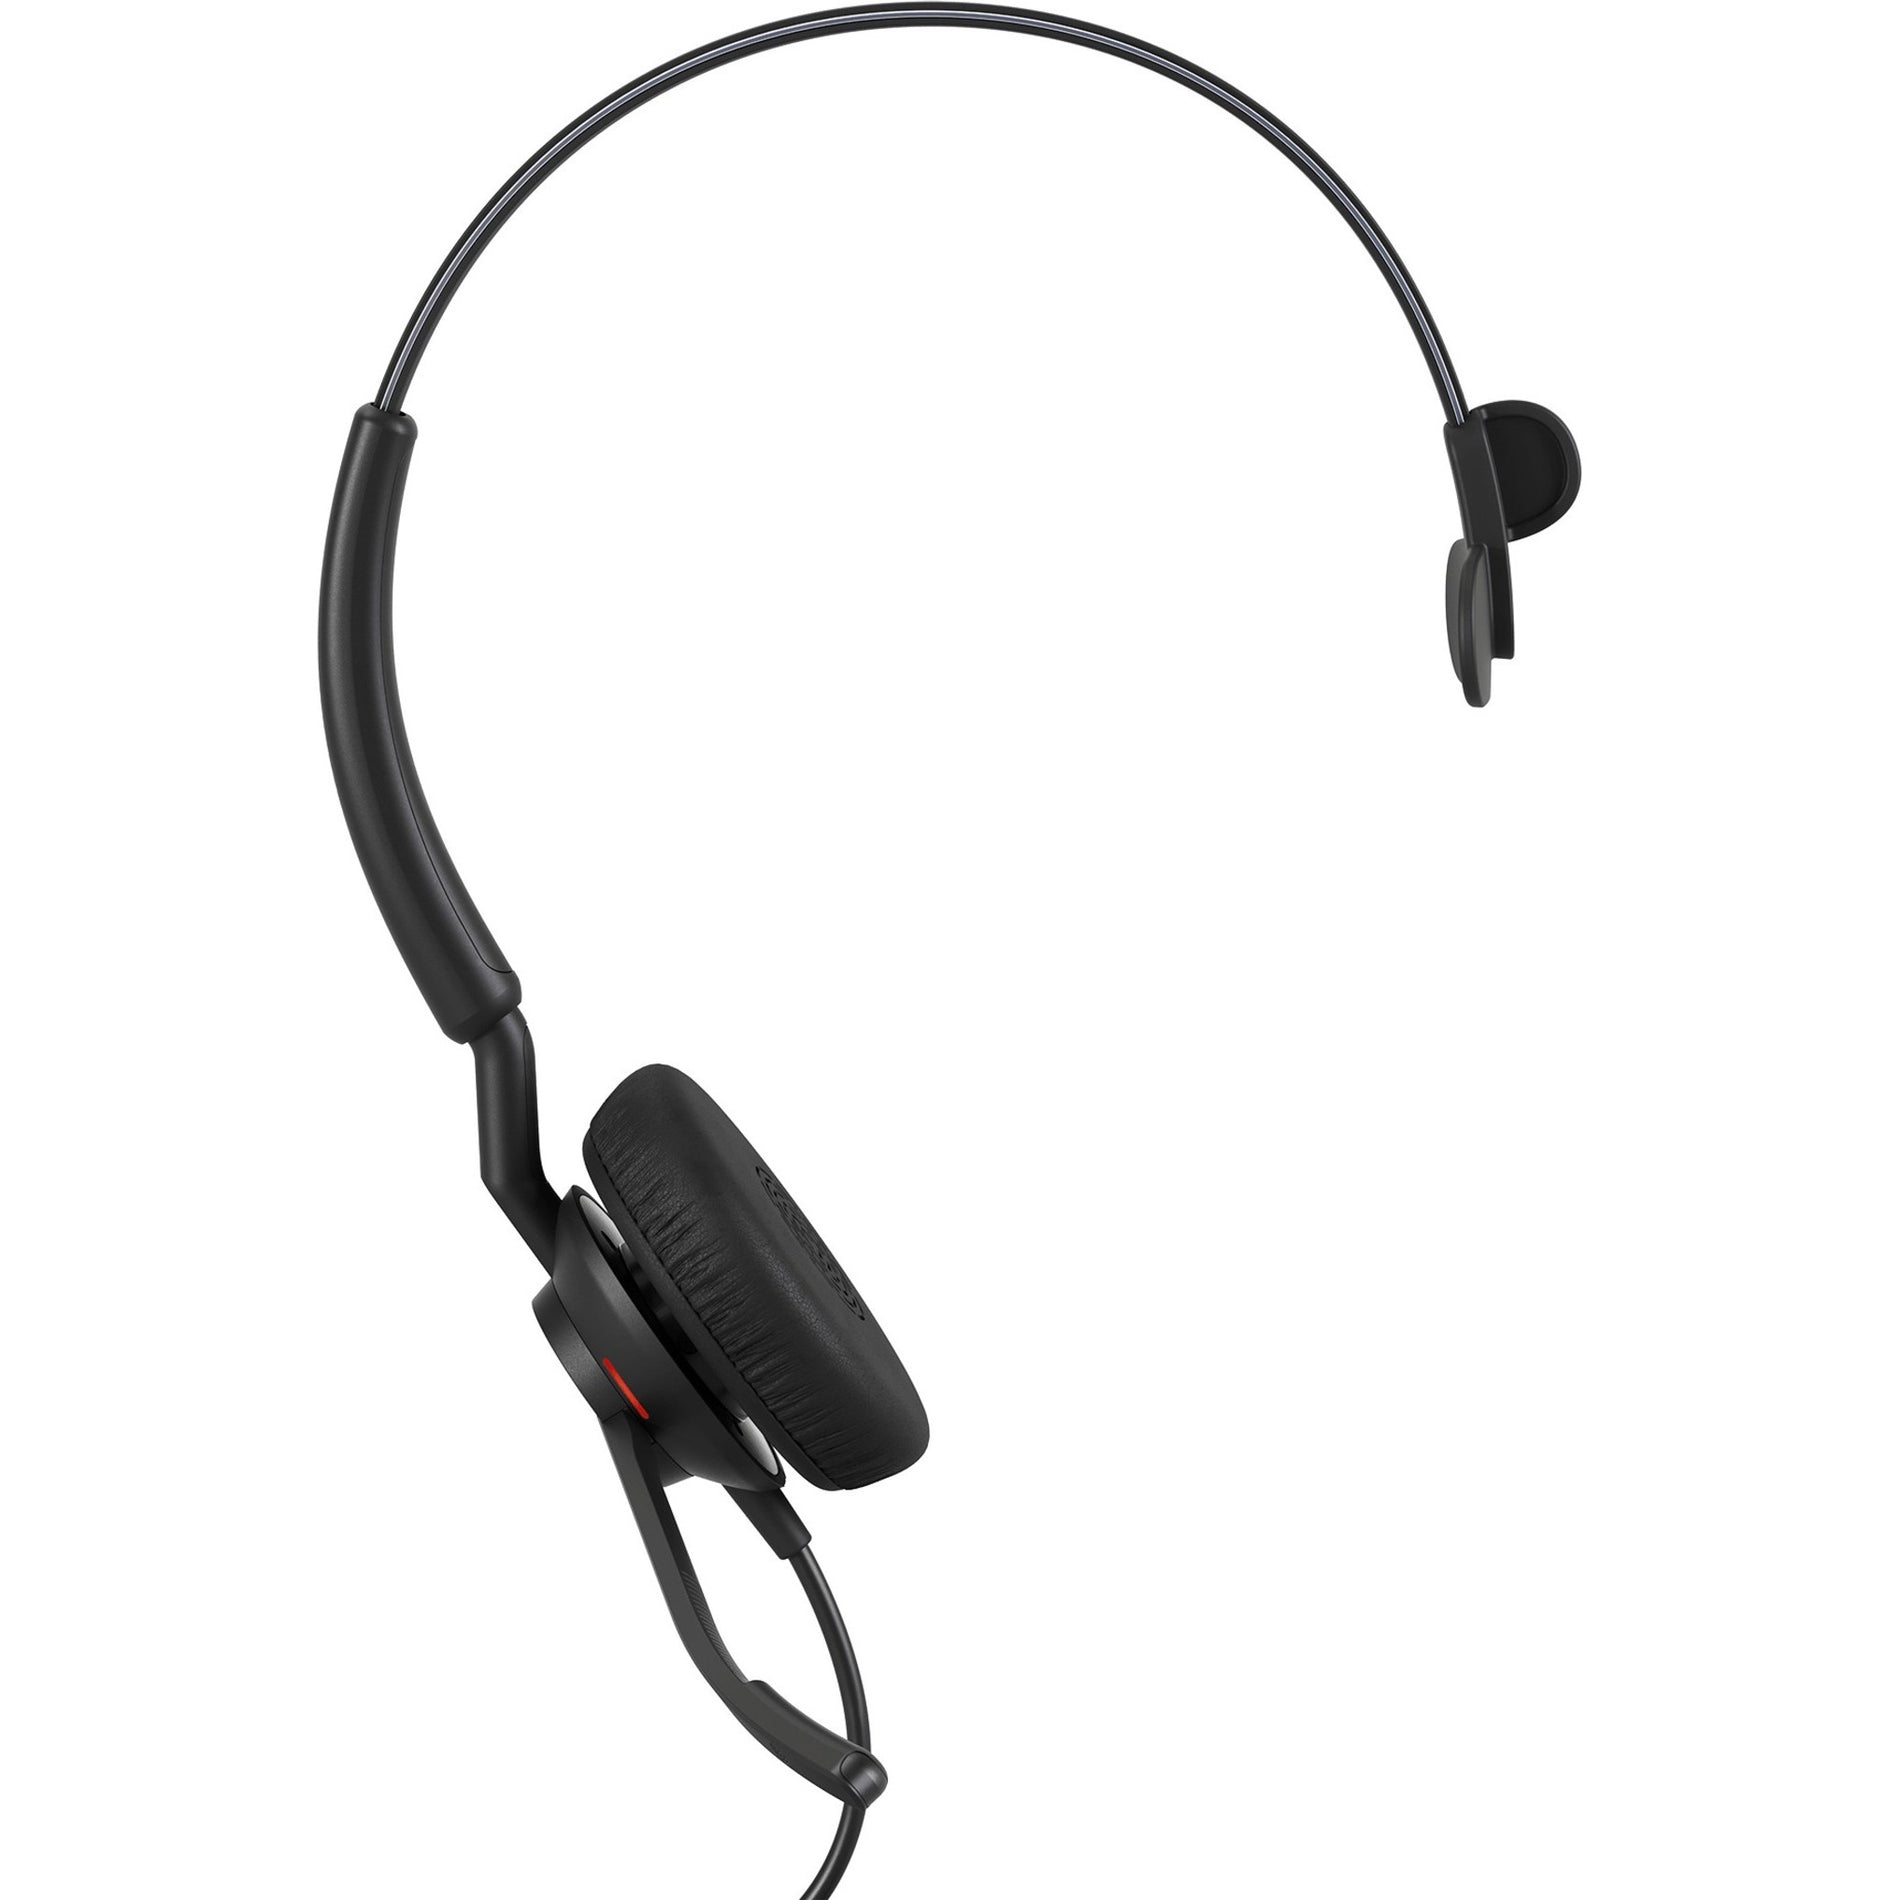 Jabra 4093-419-279 ENGAGE 40 Headset, Over-the-head USB Type A Wired Mono Headset with Noise Isolation, Comfortable Design, and 3-Year Warranty